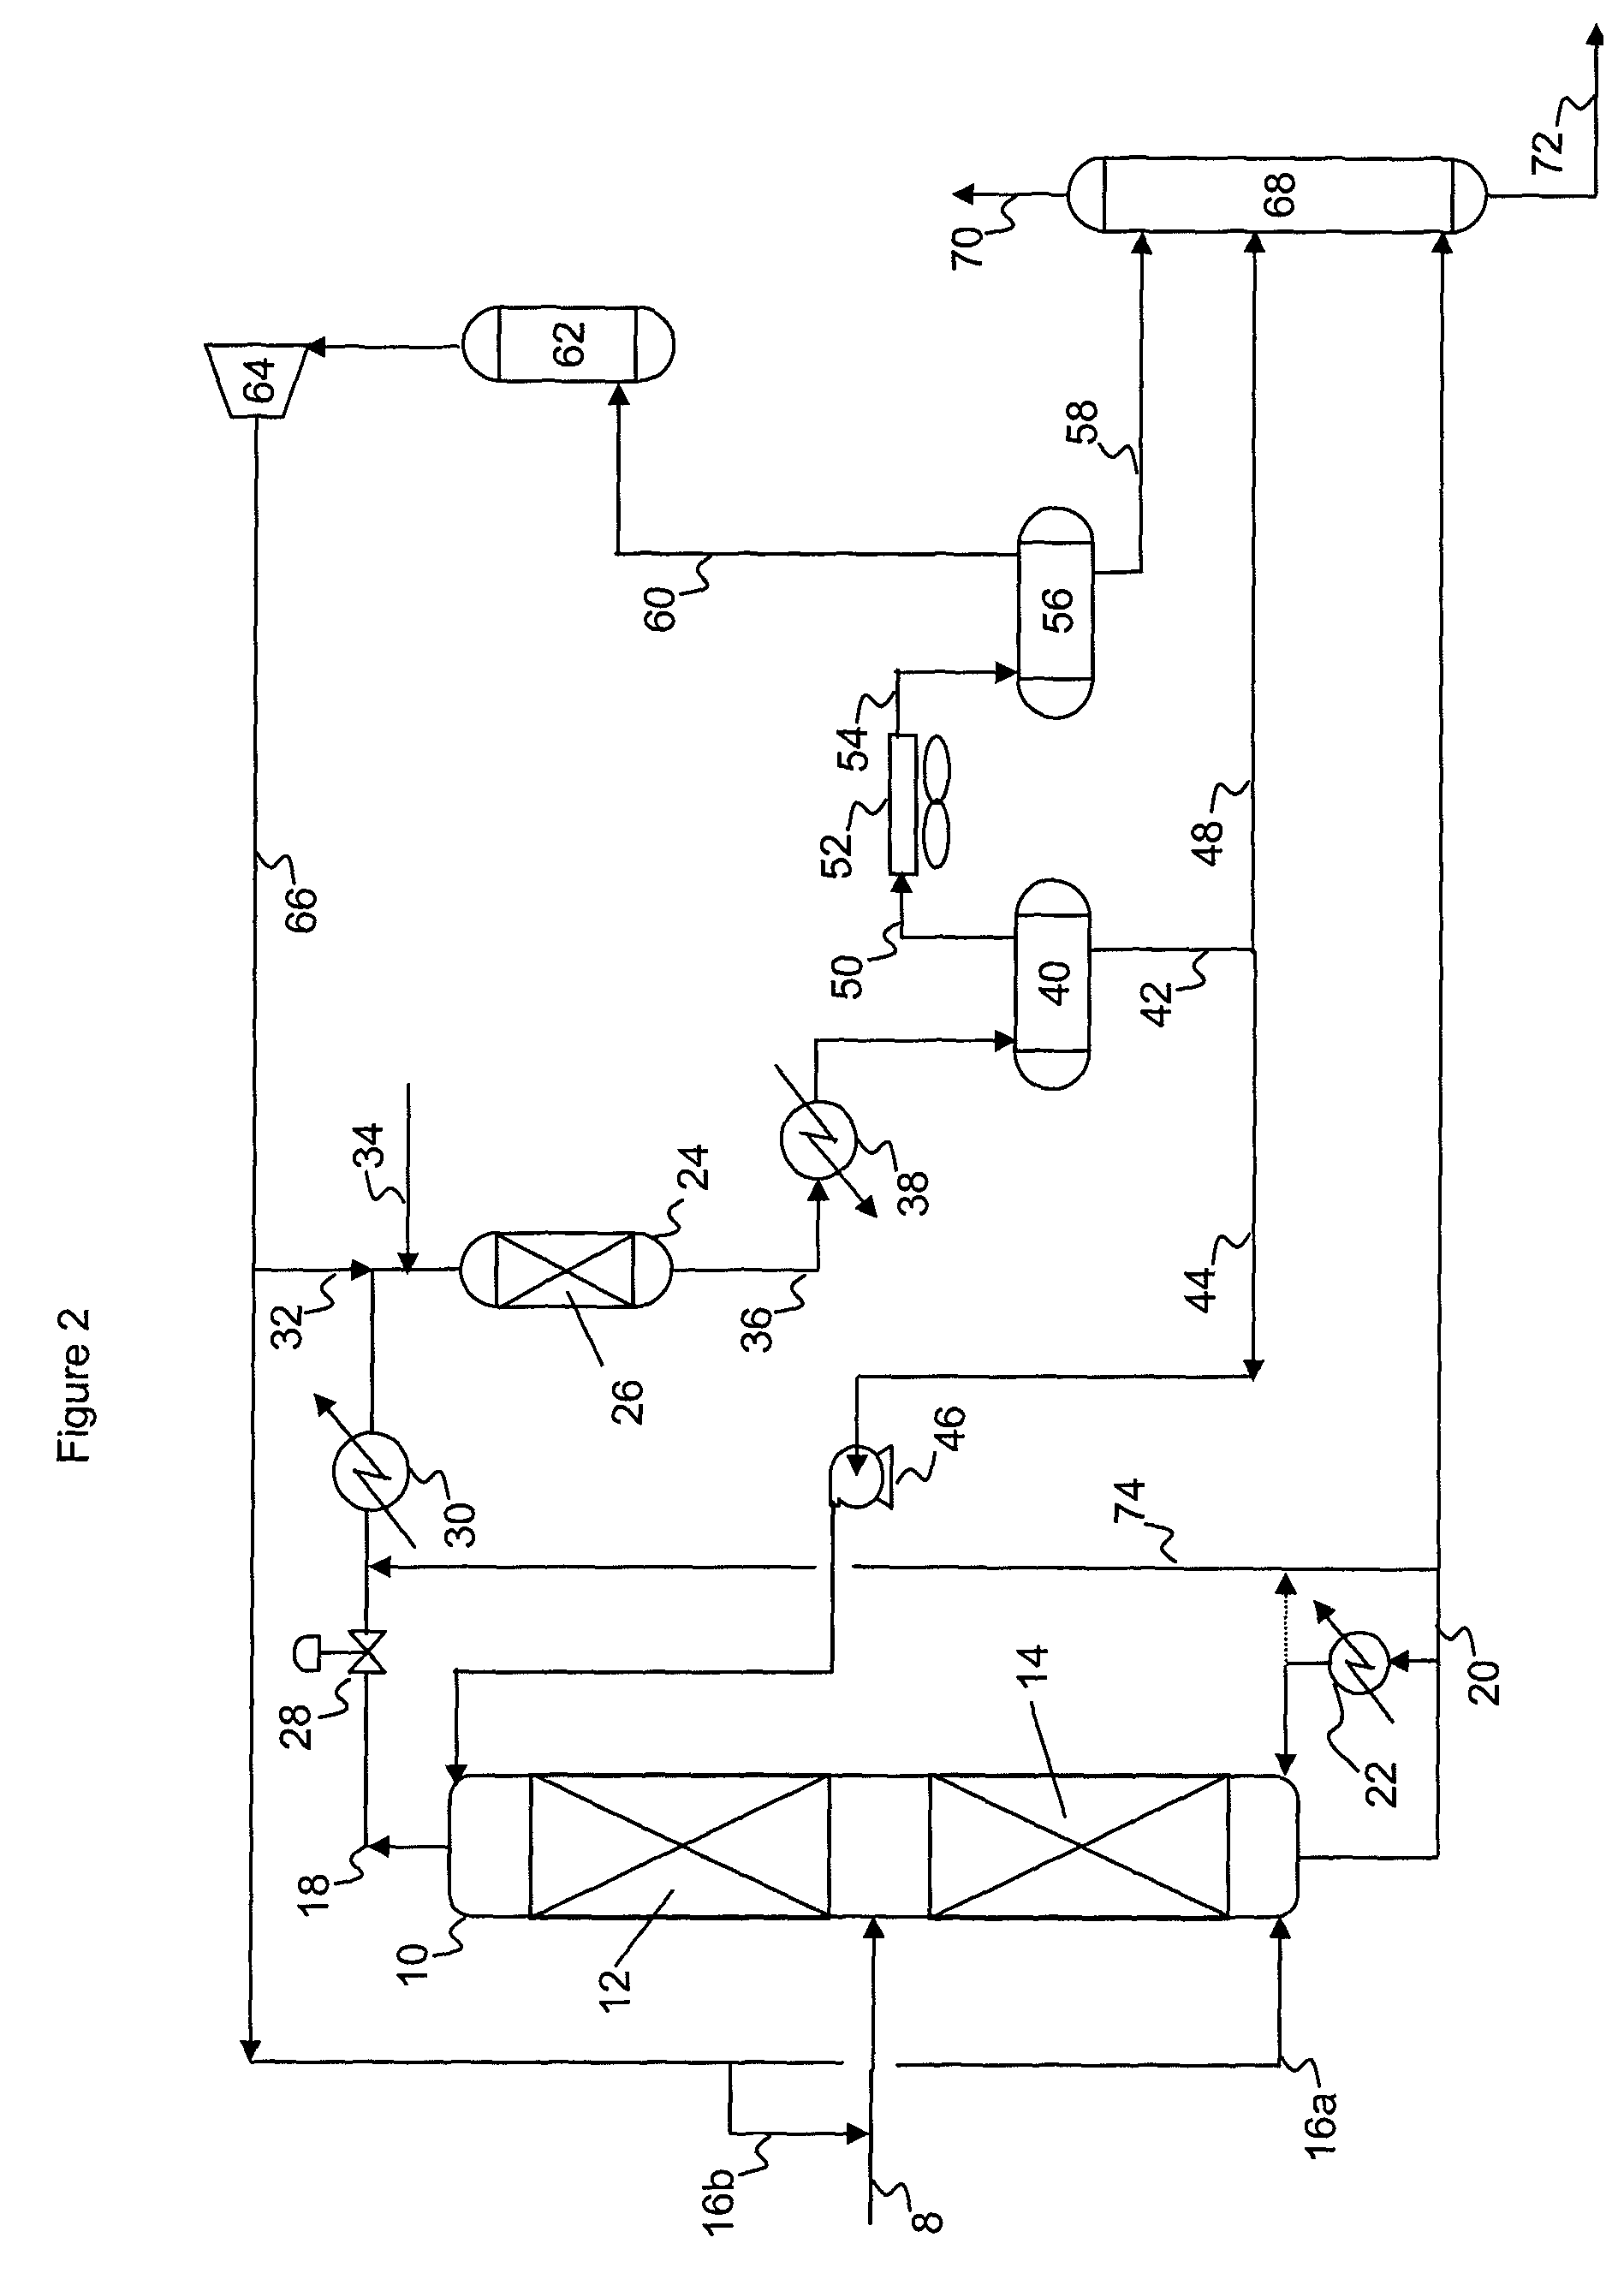 Process to hydrodesulfurize FCC gasoline resulting in a low-mercaptan product